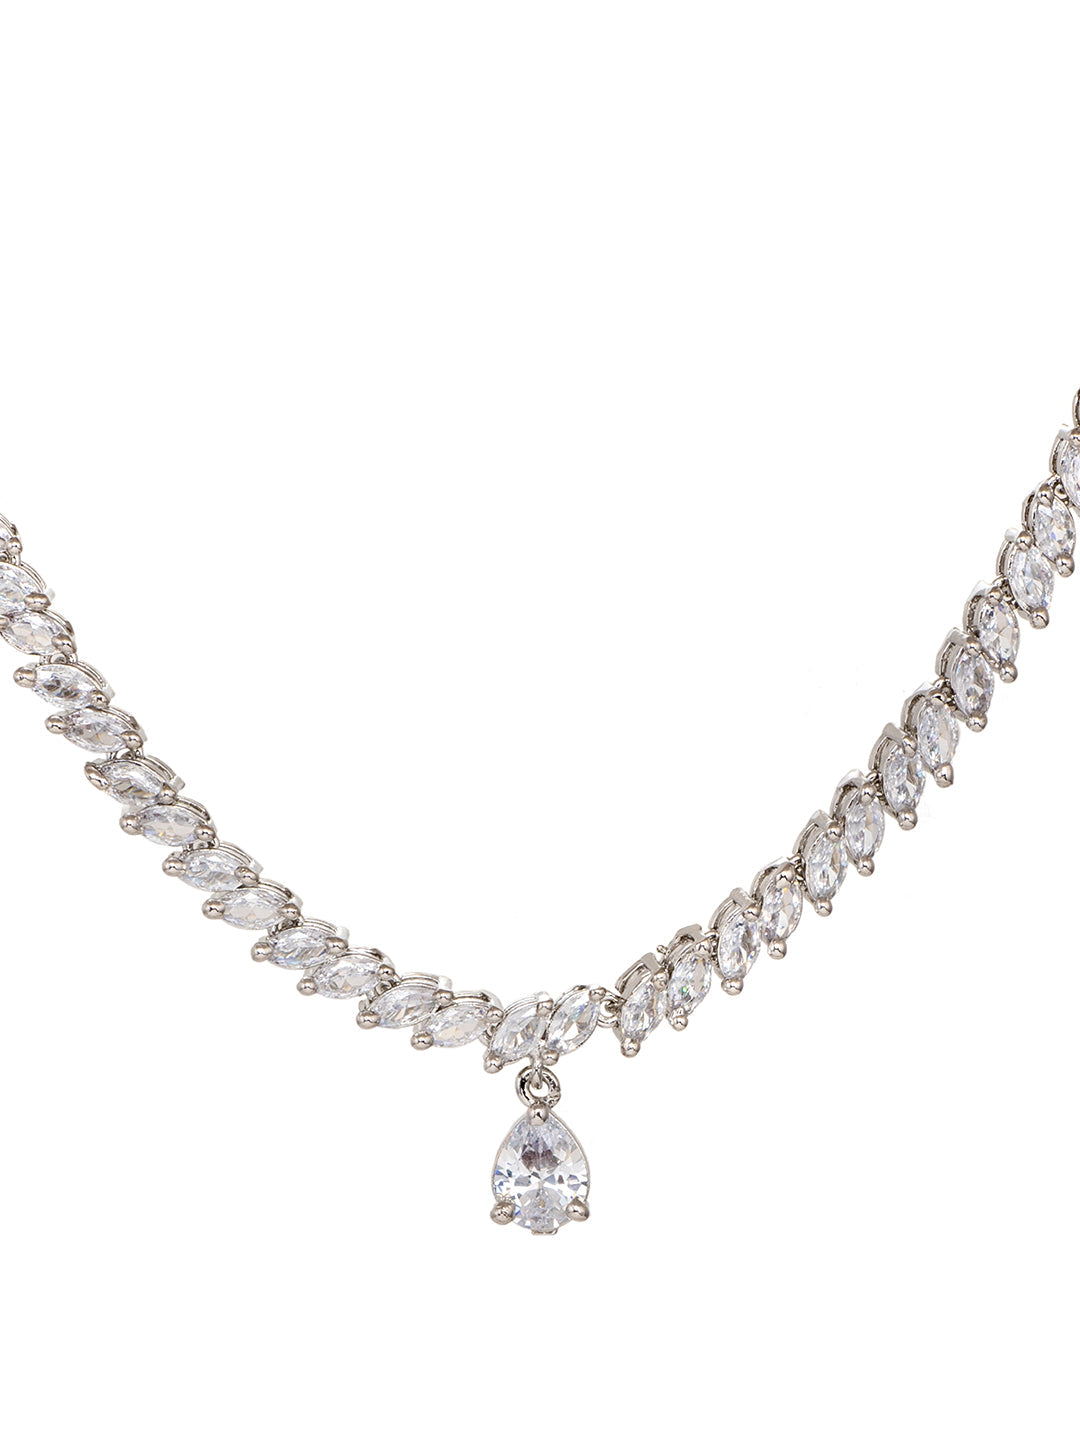 White Gold And Diamond Collar Necklace Available For Immediate Sale At  Sotheby's